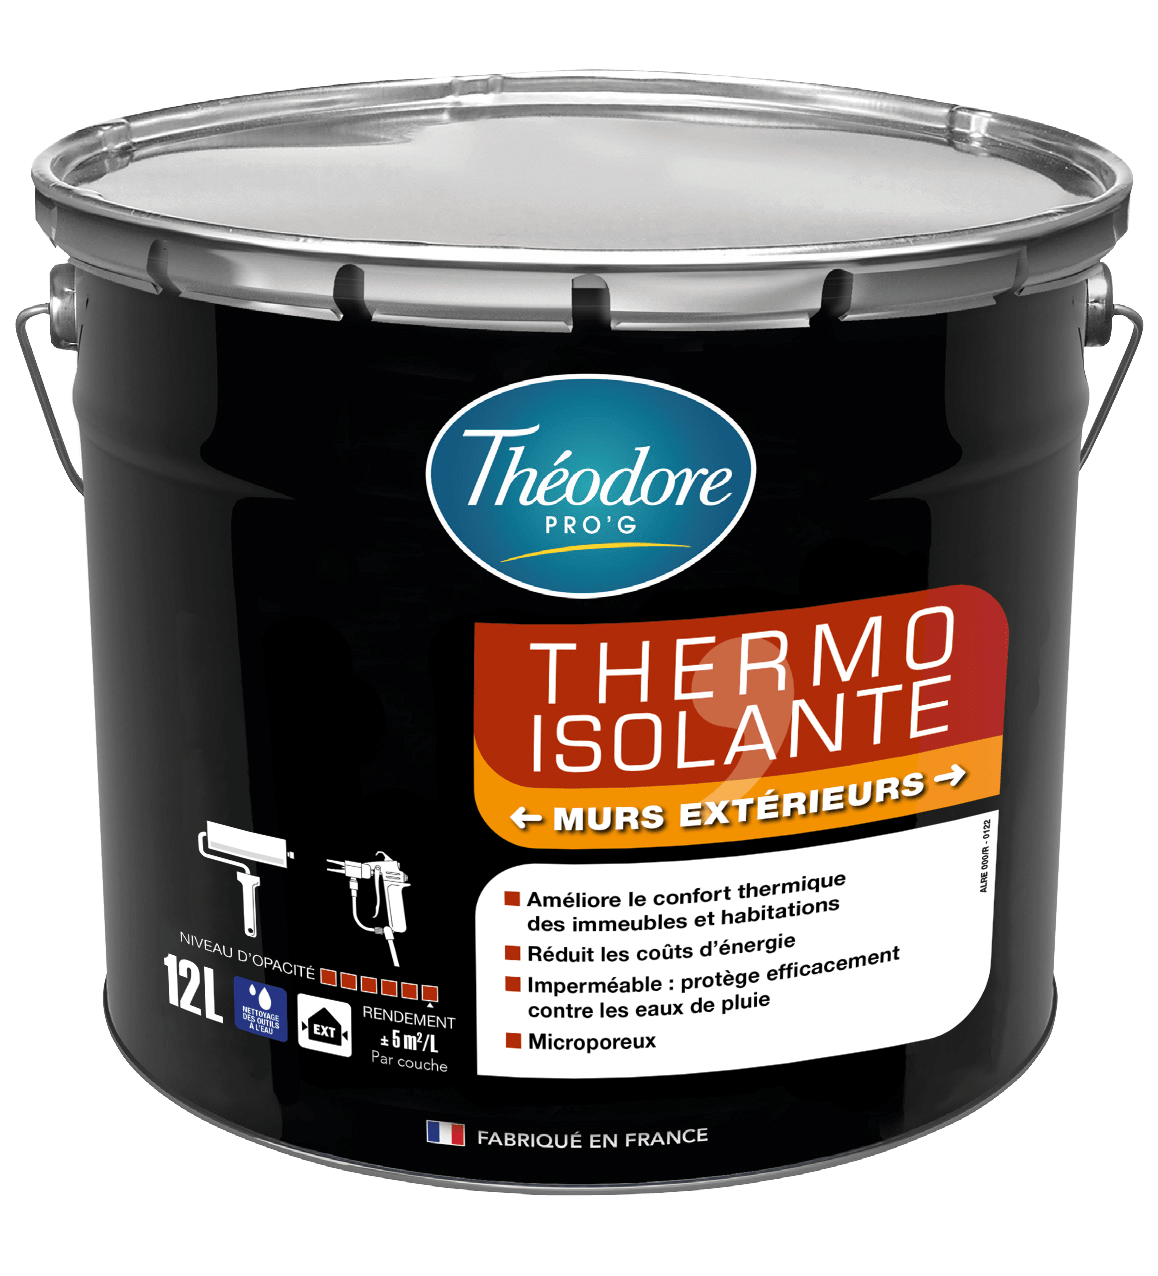 THERMO ISOLANTE MURS EXTERIEURS